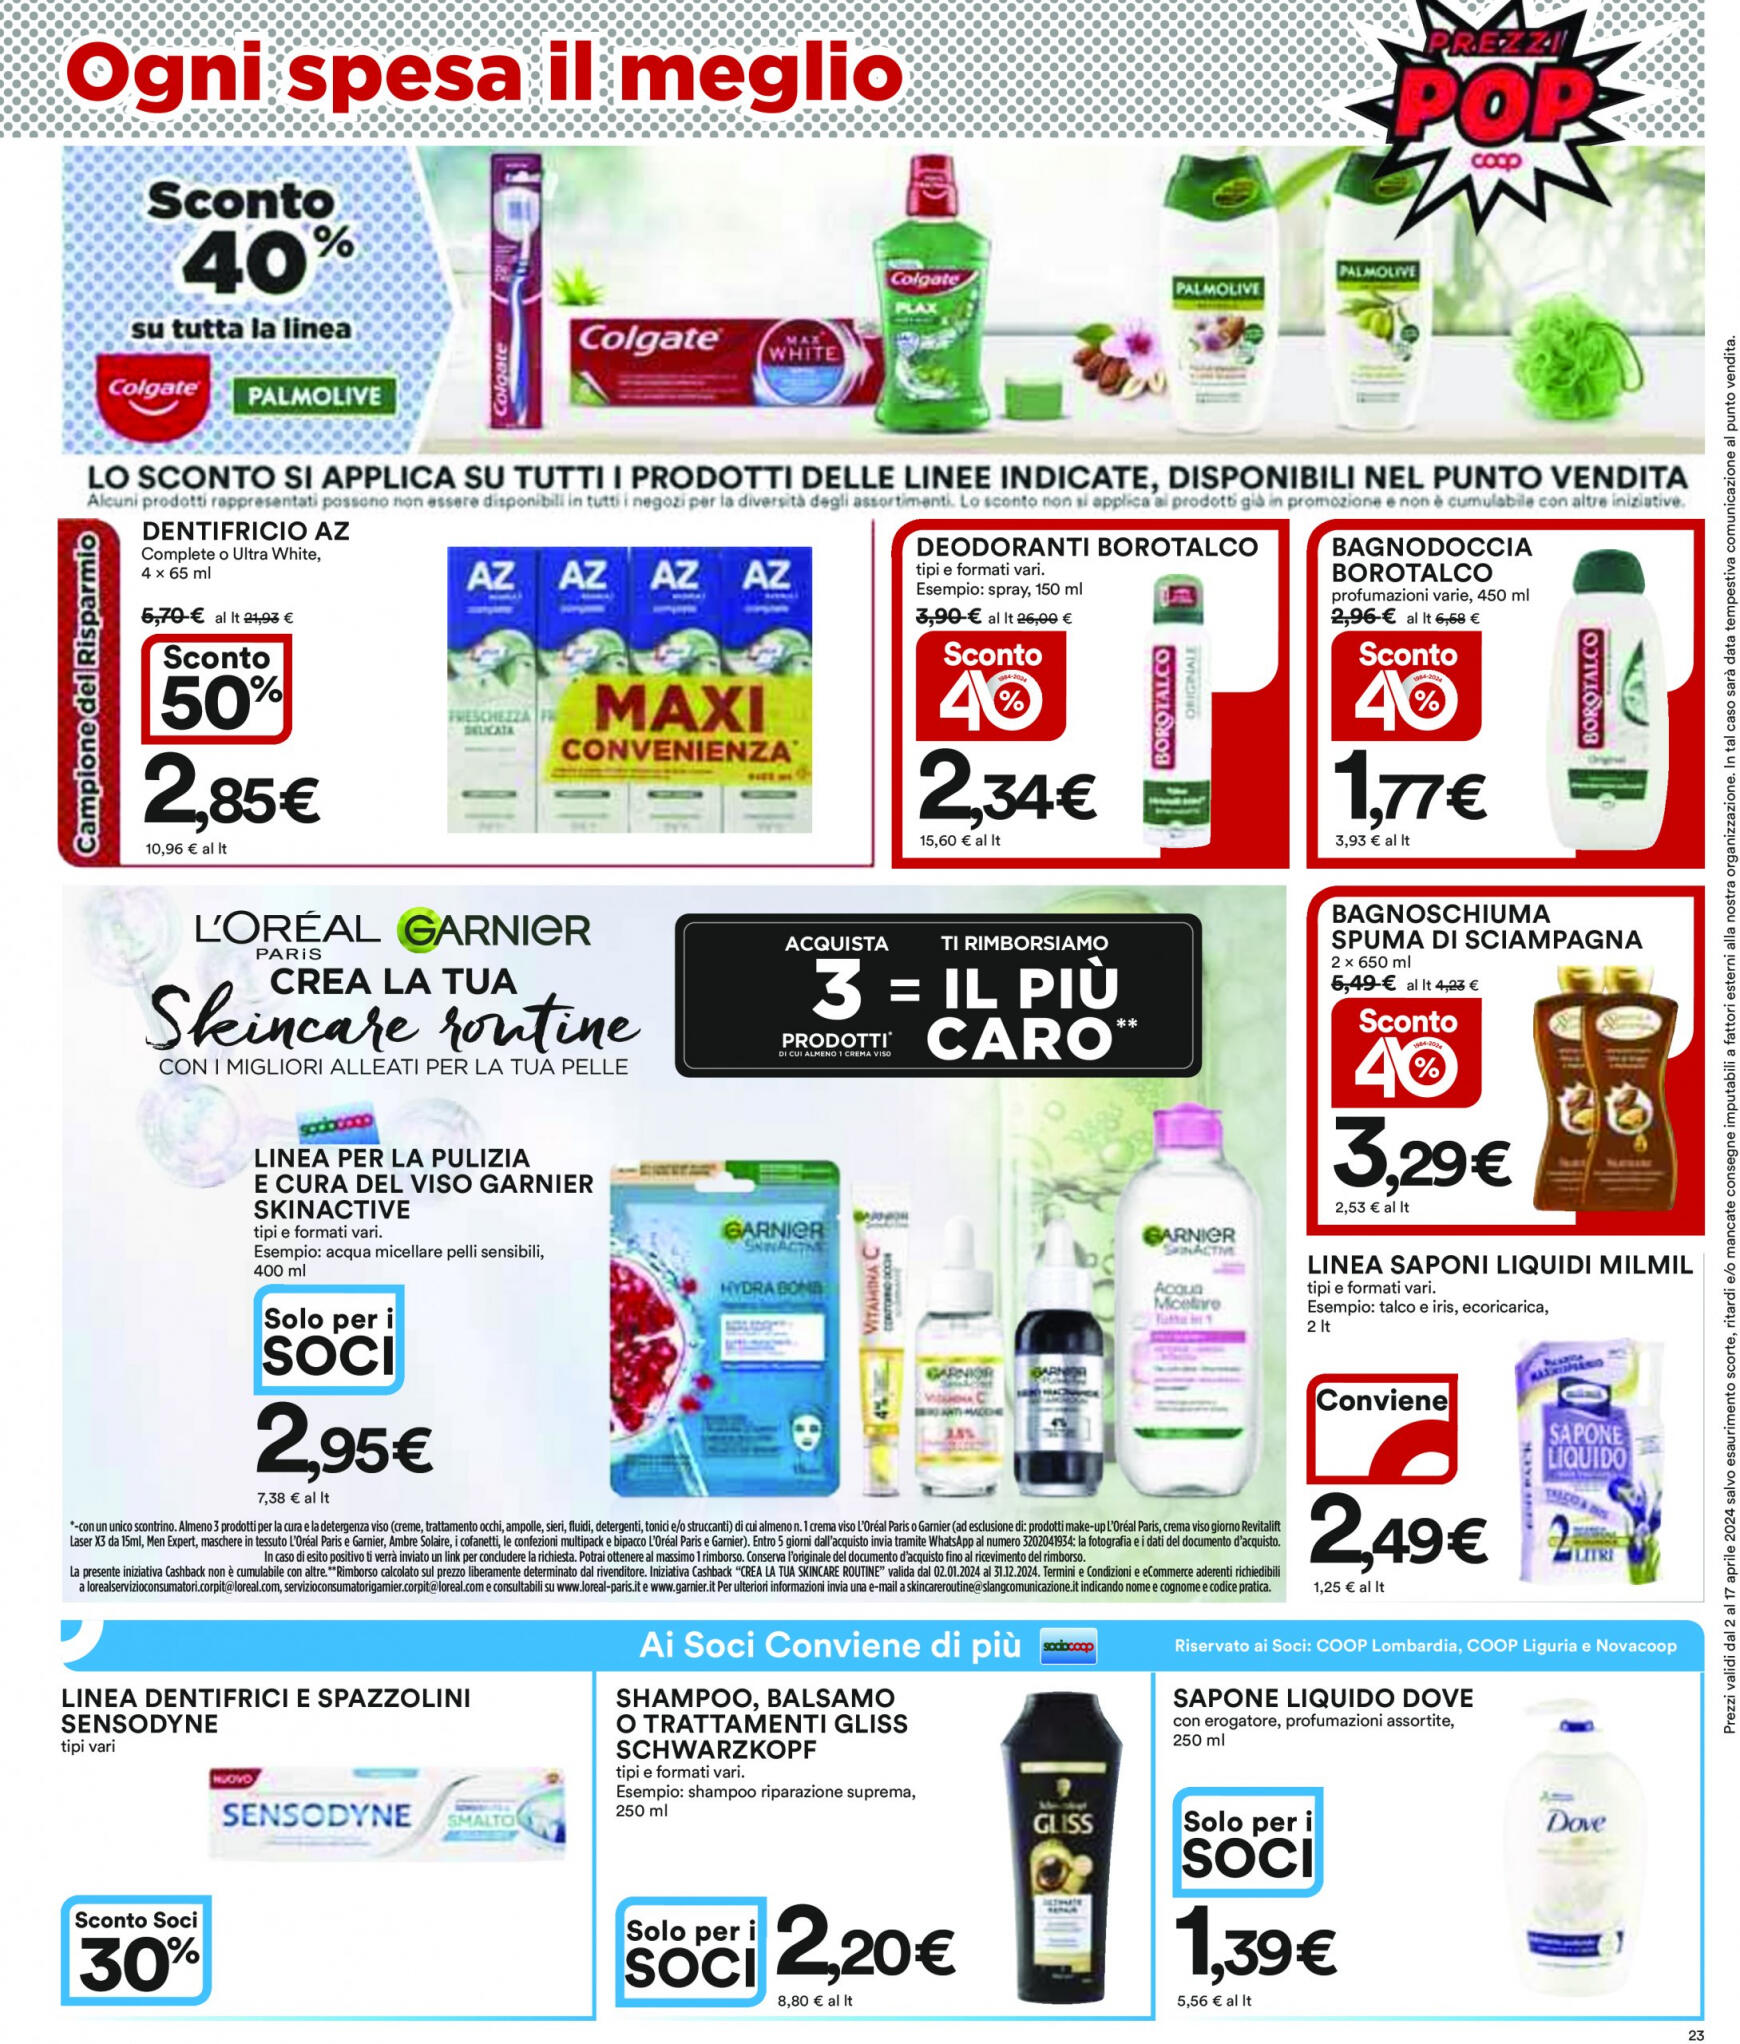 coop - Nuovo volantino Coop 02.04. - 17.04. - page: 23